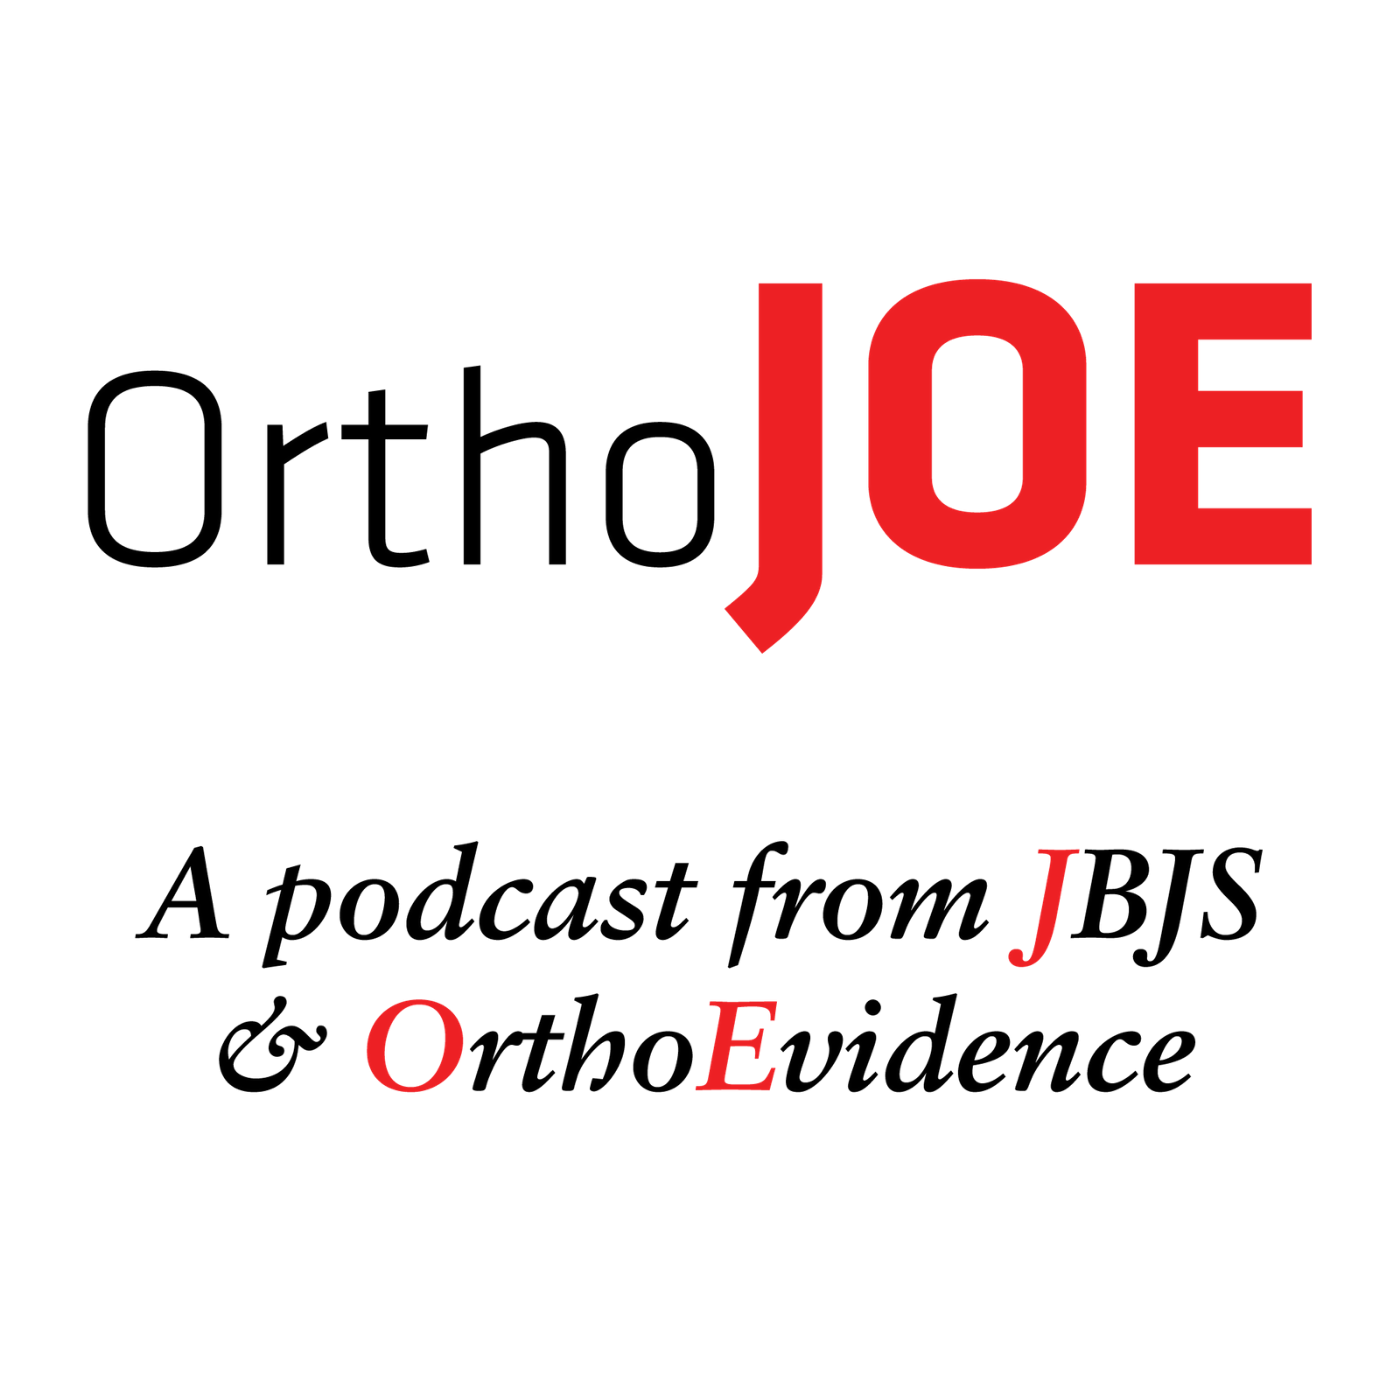 Bonus Episode! JBJS OrthoCorps: An Audio Archive of Stories from the Orthopaedic Community (Part 4)